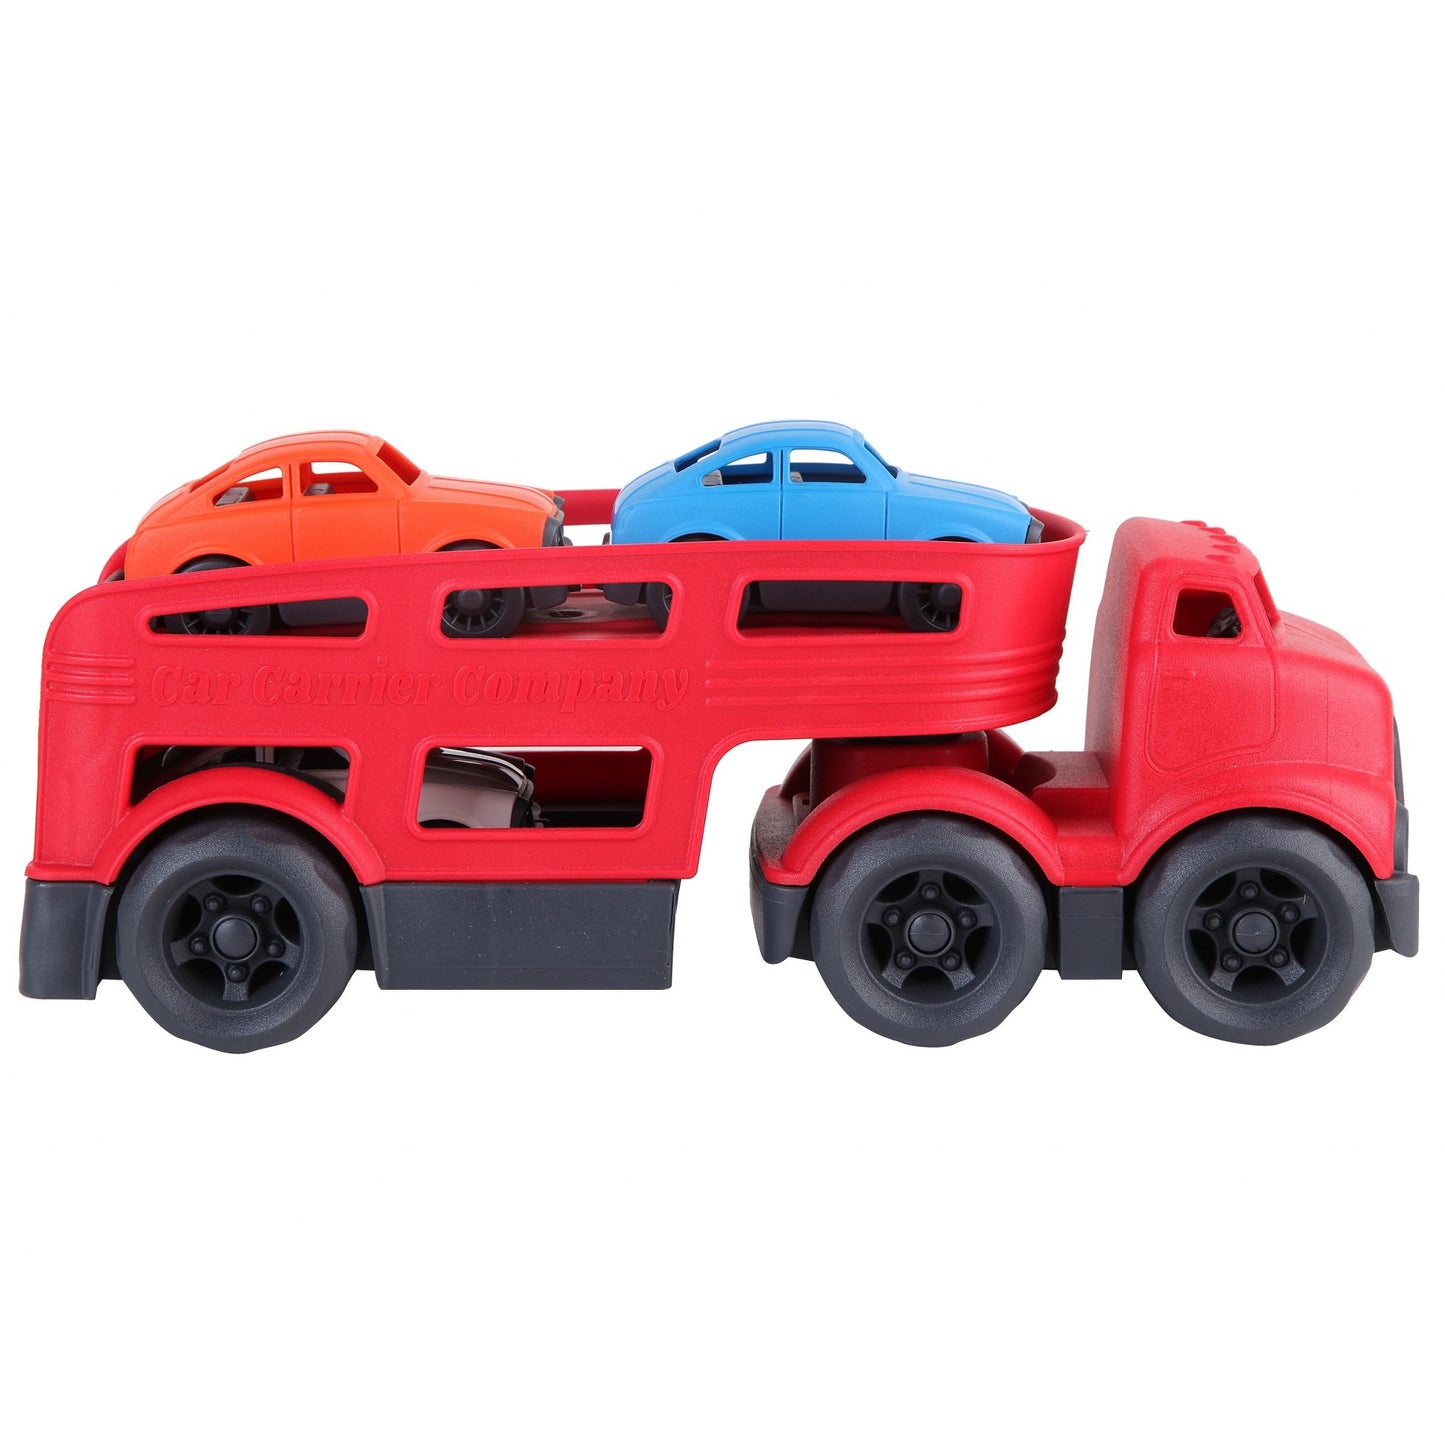 Red Car Carrier with 3 Colored Cars